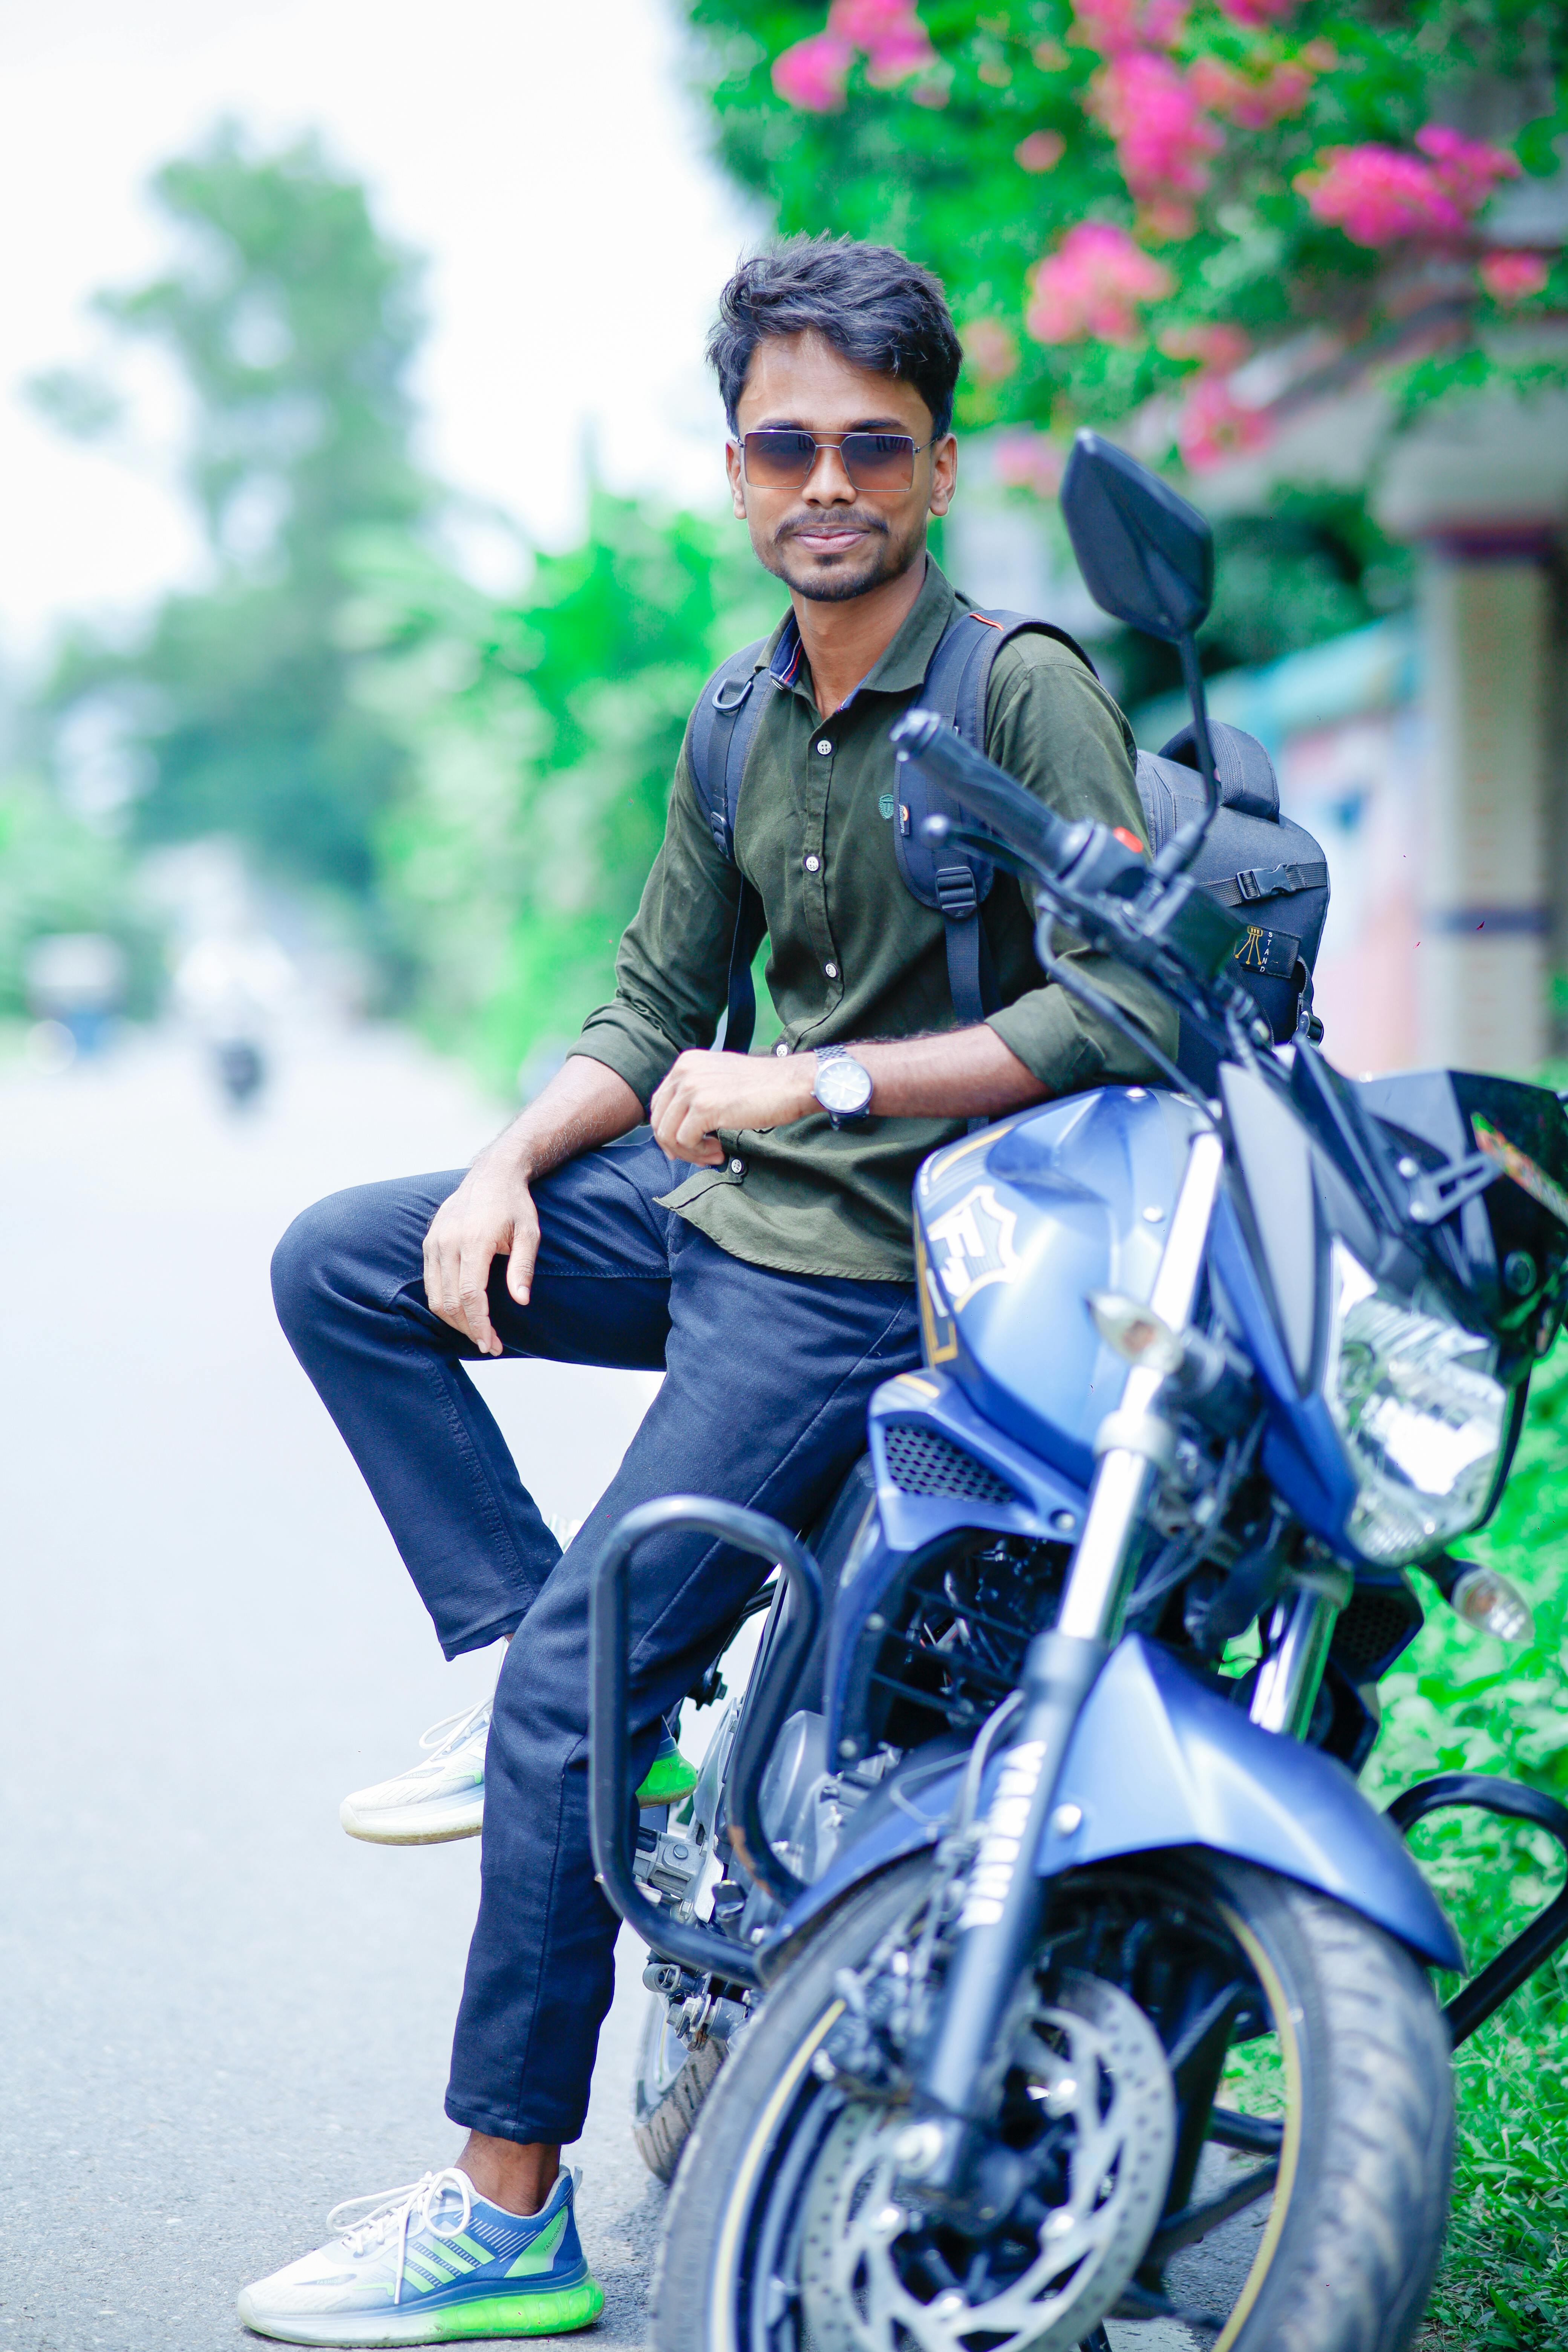 PHOTOGRAPHY #style #pose #shoot #picoftheday #streetstyle #poses #status  #photo #photography #bike #nature | Instagram